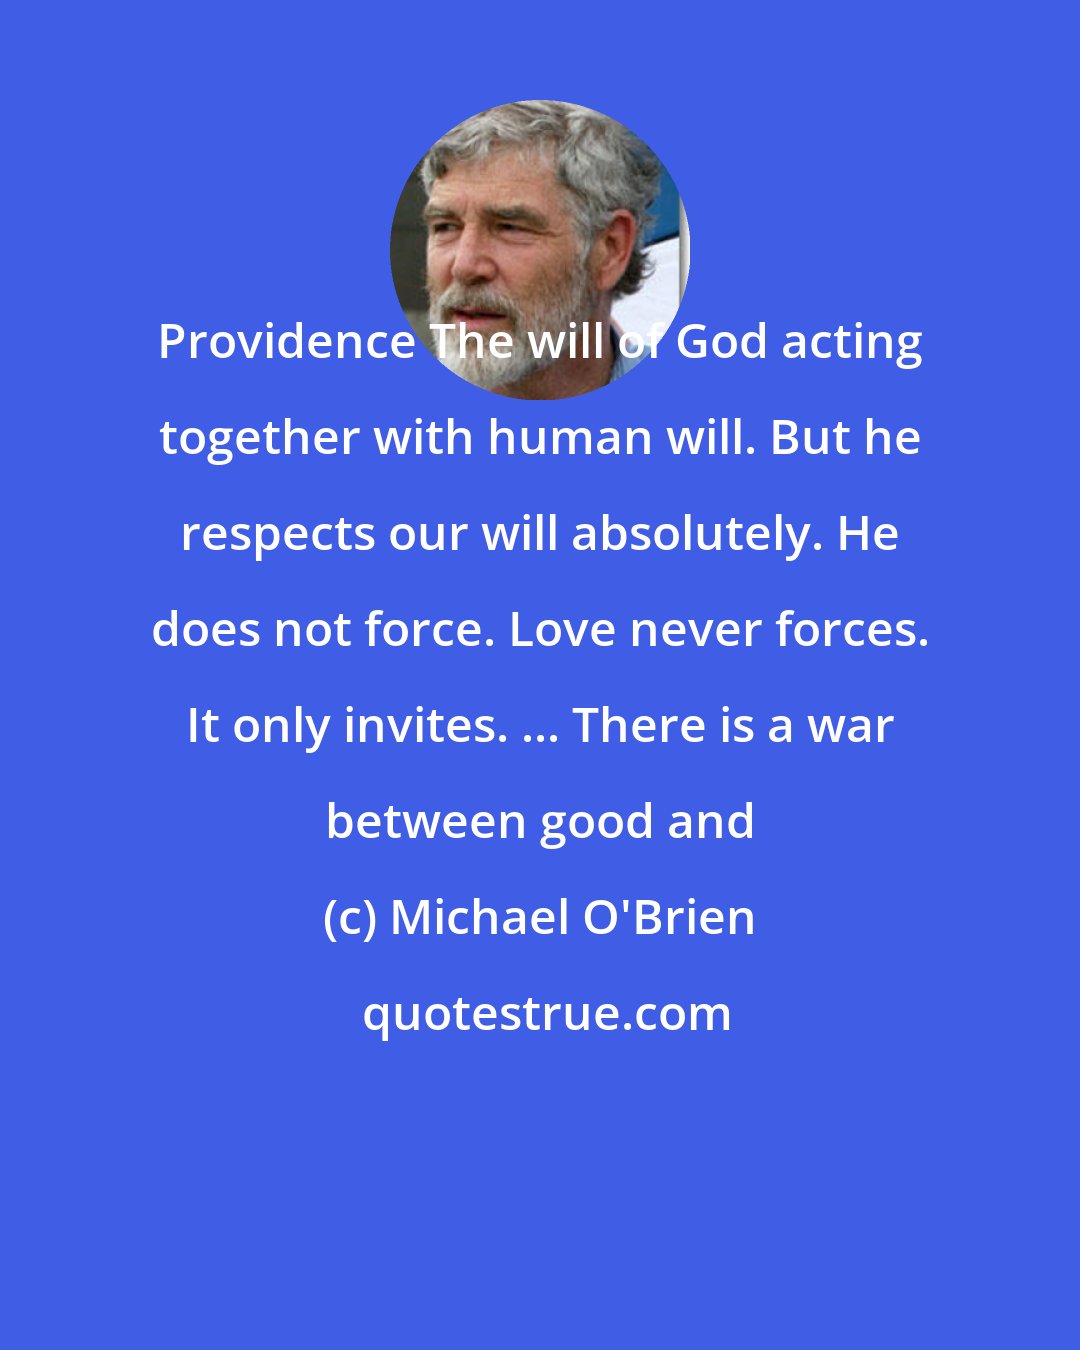 Michael O'Brien: Providence The will of God acting together with human will. But he respects our will absolutely. He does not force. Love never forces. It only invites. ... There is a war between good and